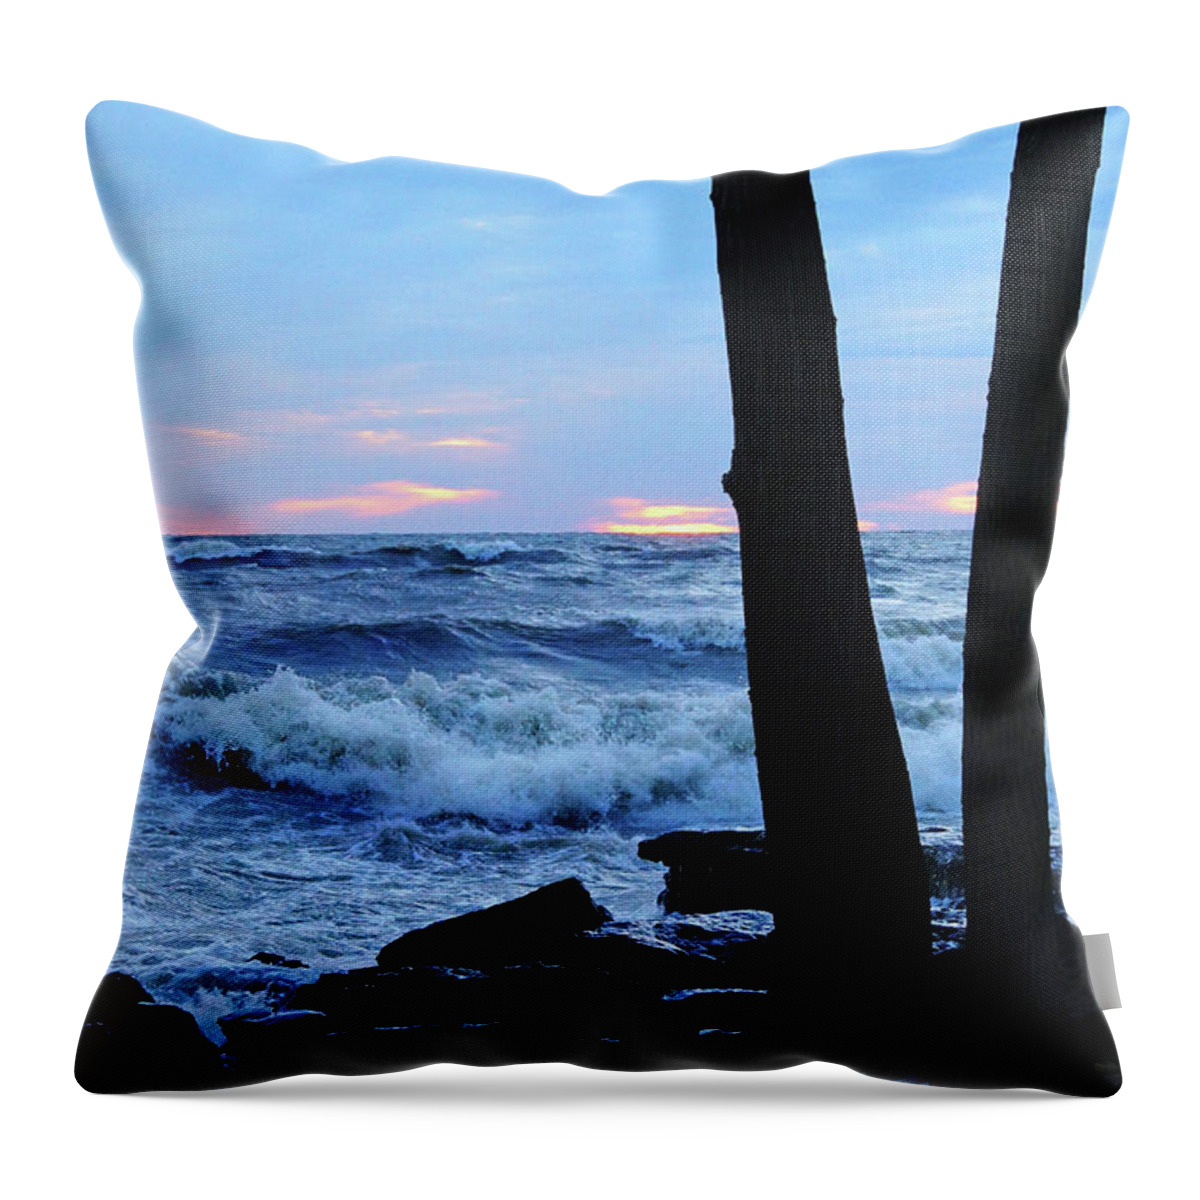 Lake Erie Throw Pillow featuring the photograph Looking Through the Trees by Mike Murdock